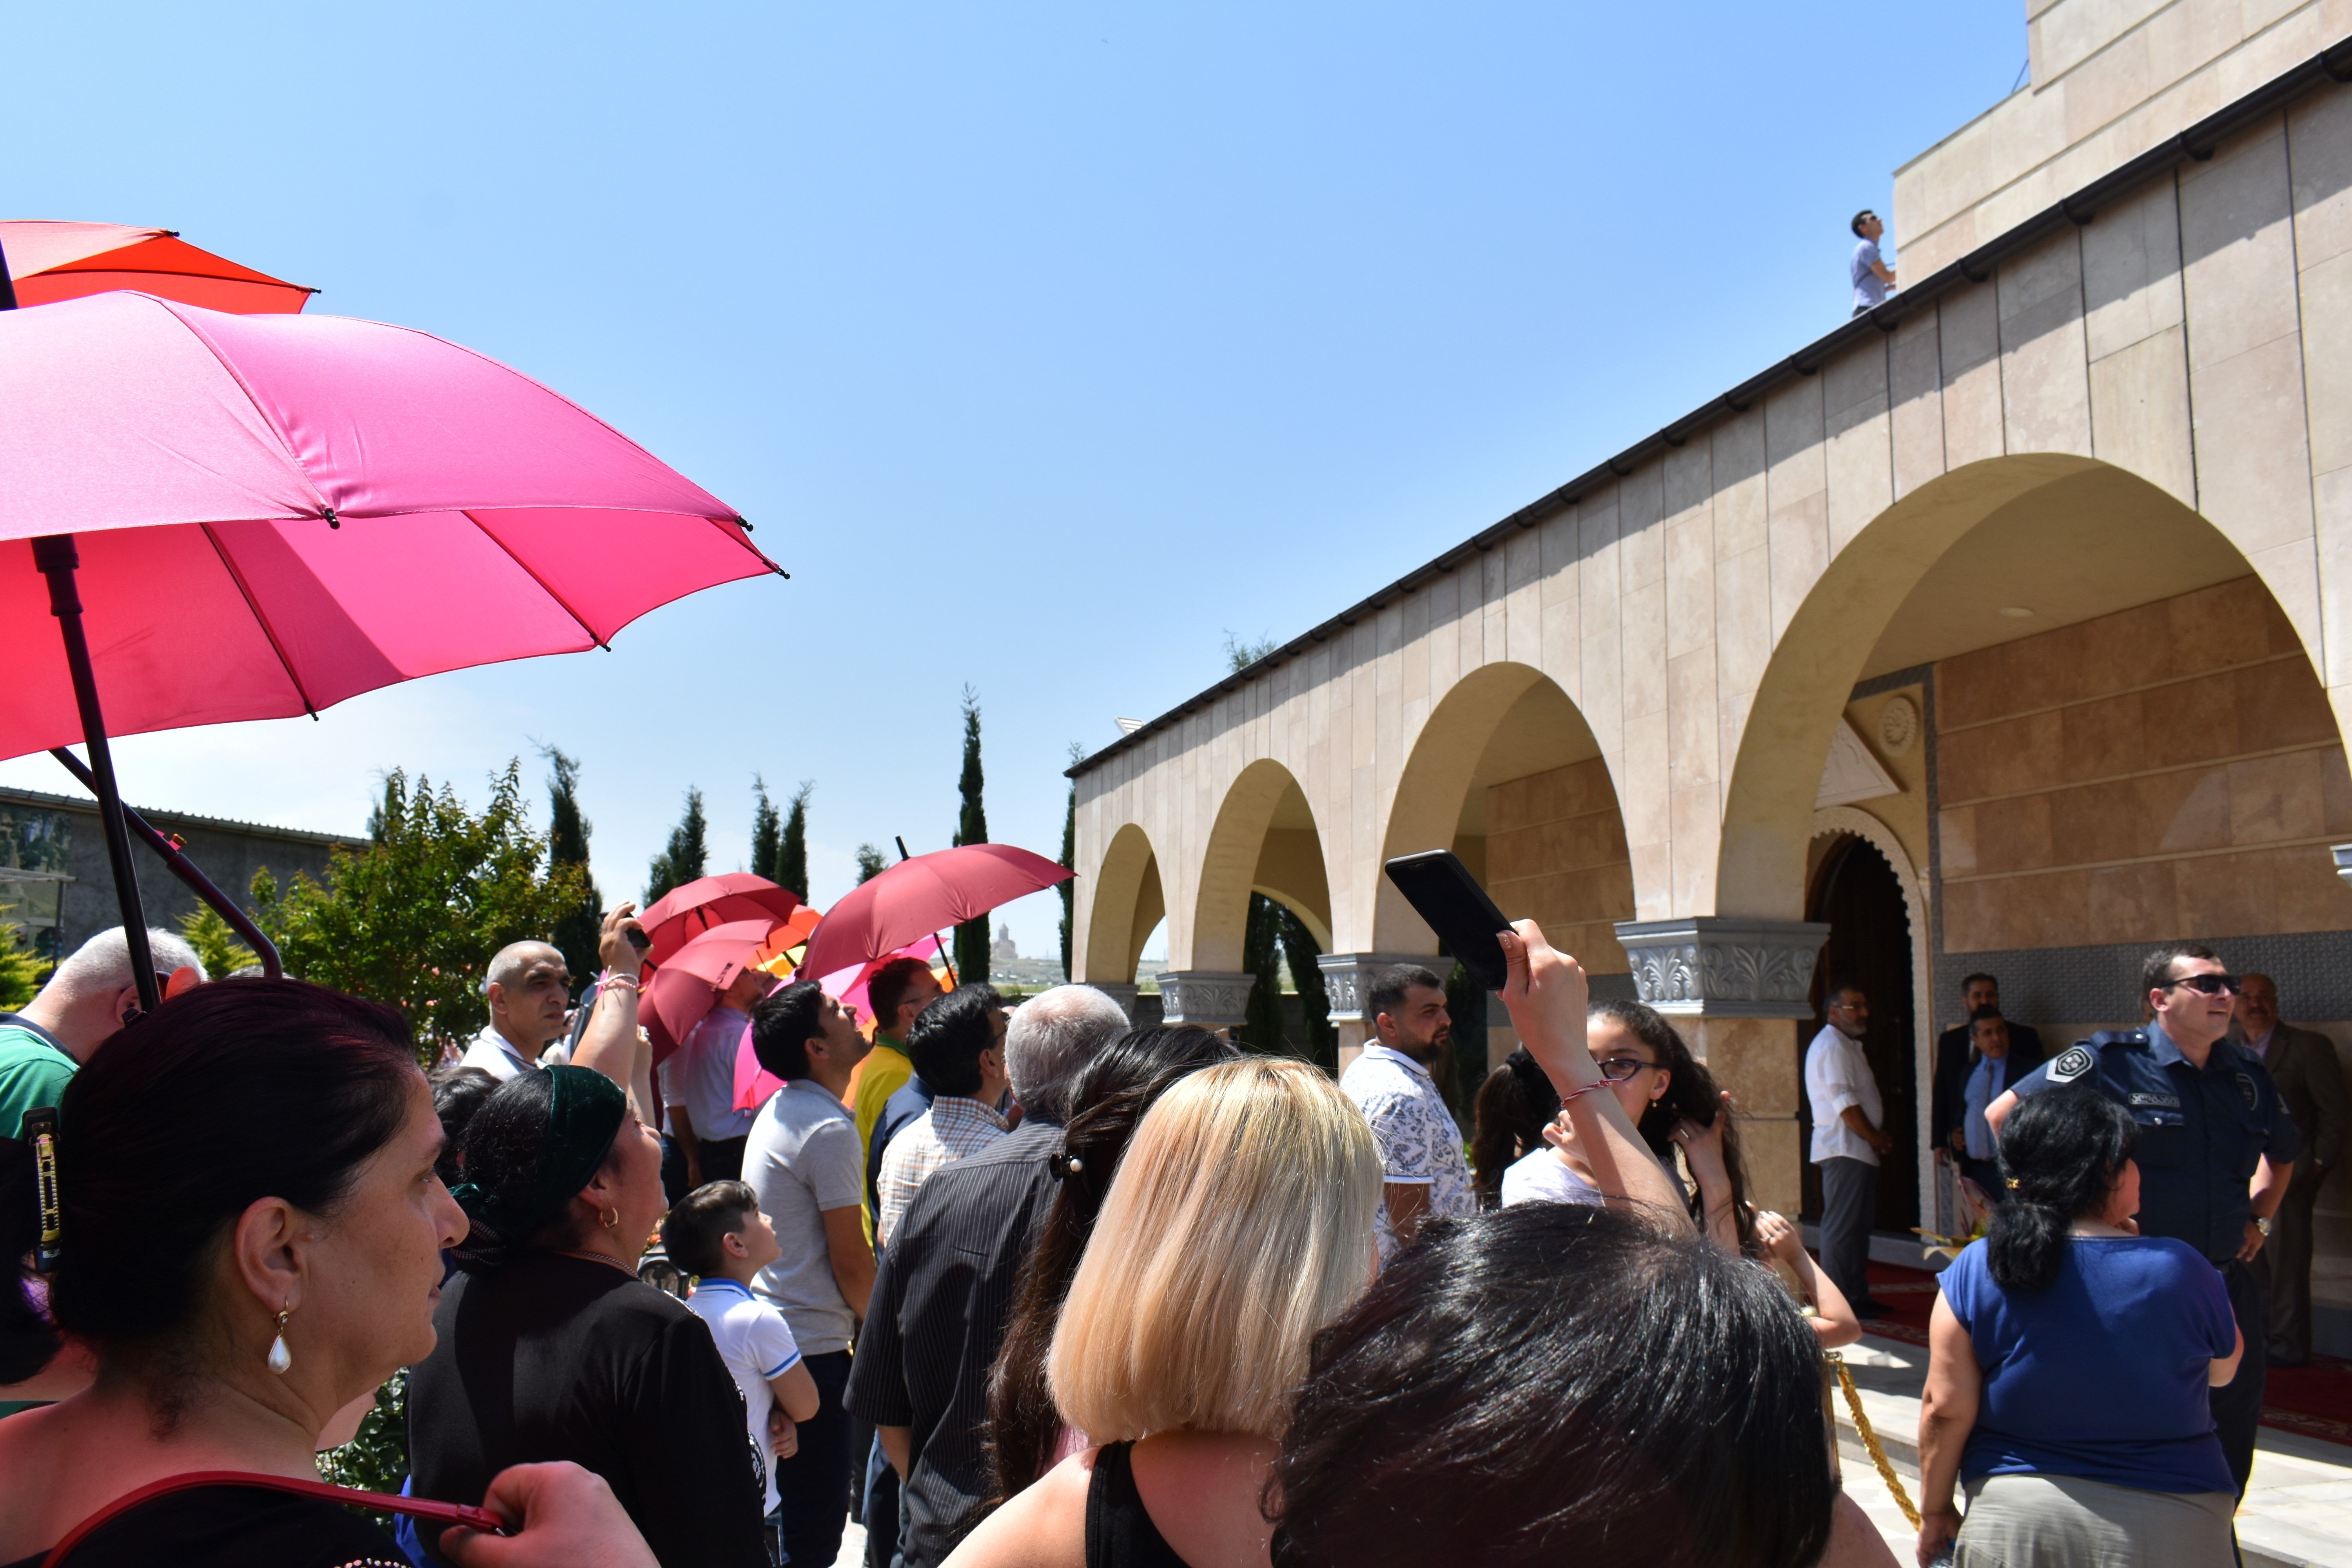 Yezidis gather in the temple courtyard in Tbilisi for Tawafa Ezid, anxiously looking on as a young man climbs the cupola to raise a flag. Image by Kaitlyn Johnson. Georgia, 2019.